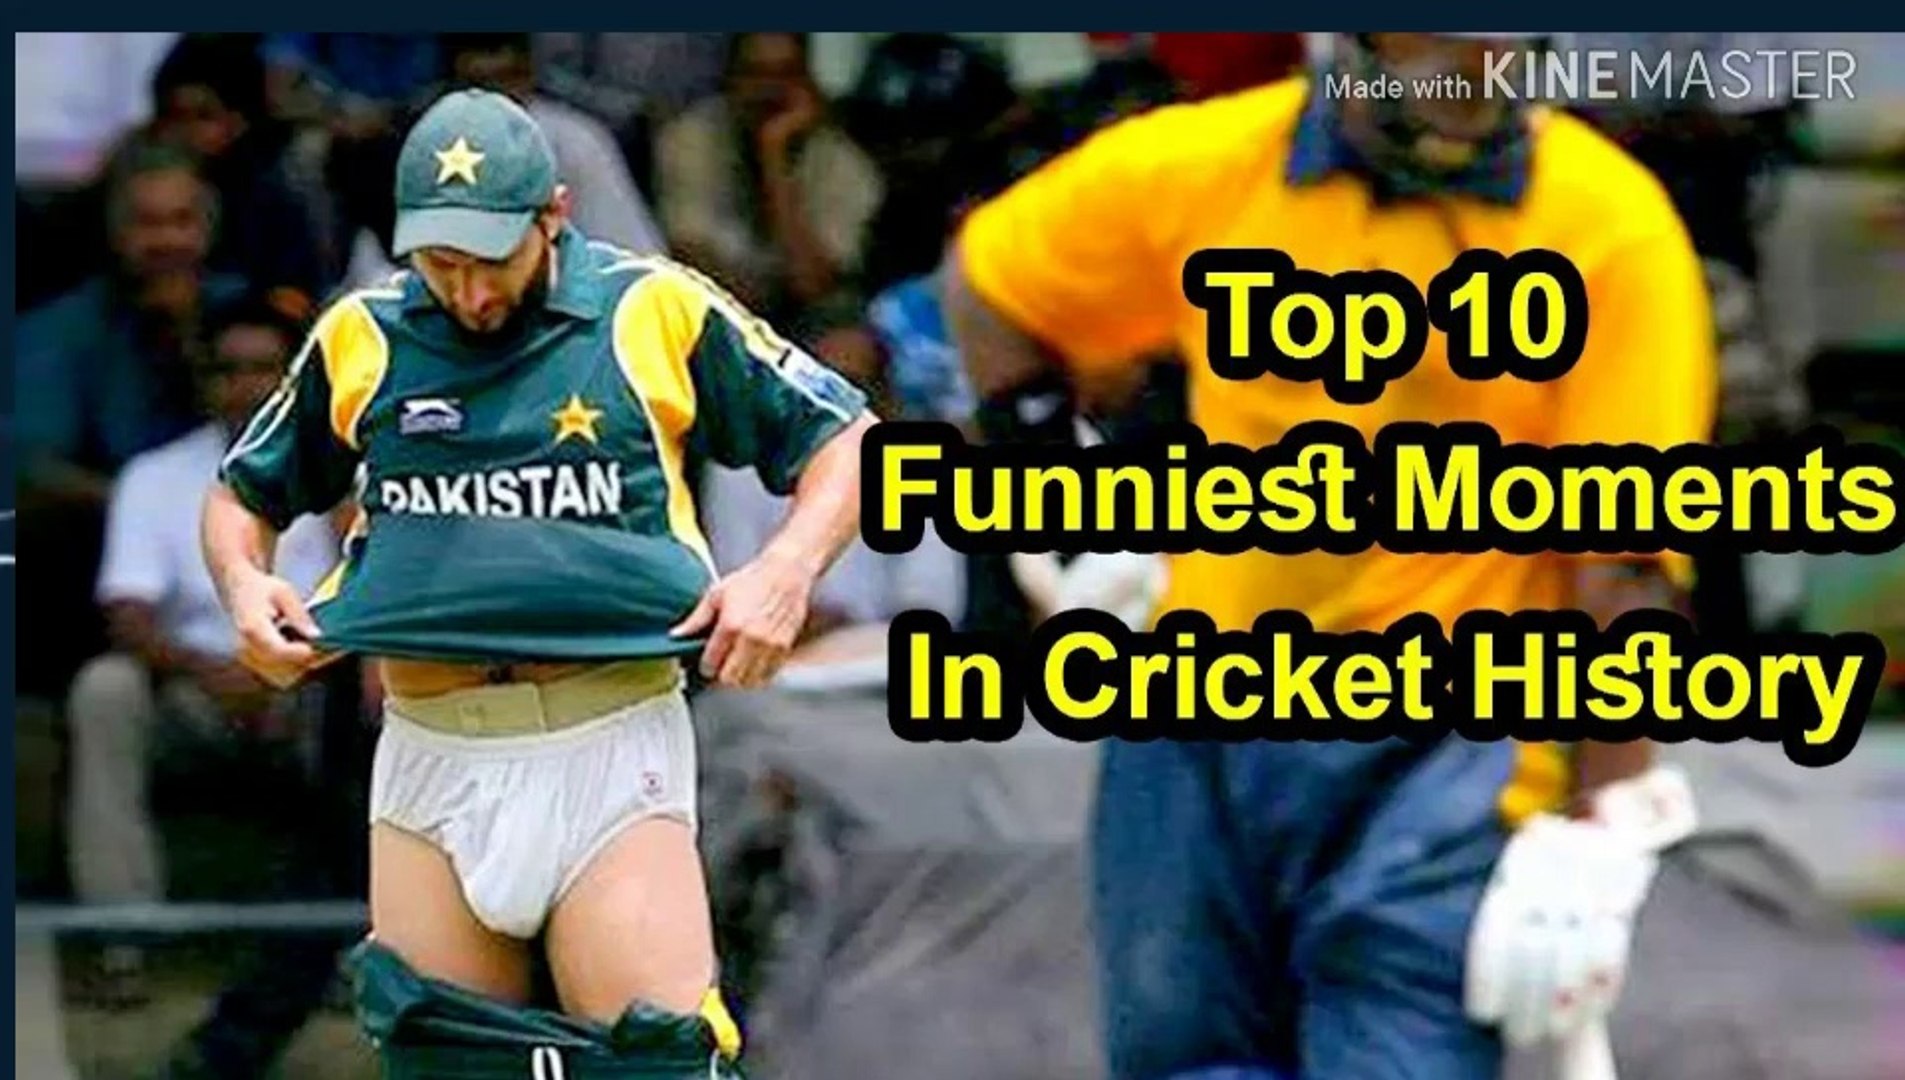 Top 10 Funniest Moments In Cricket History - video Dailymotion